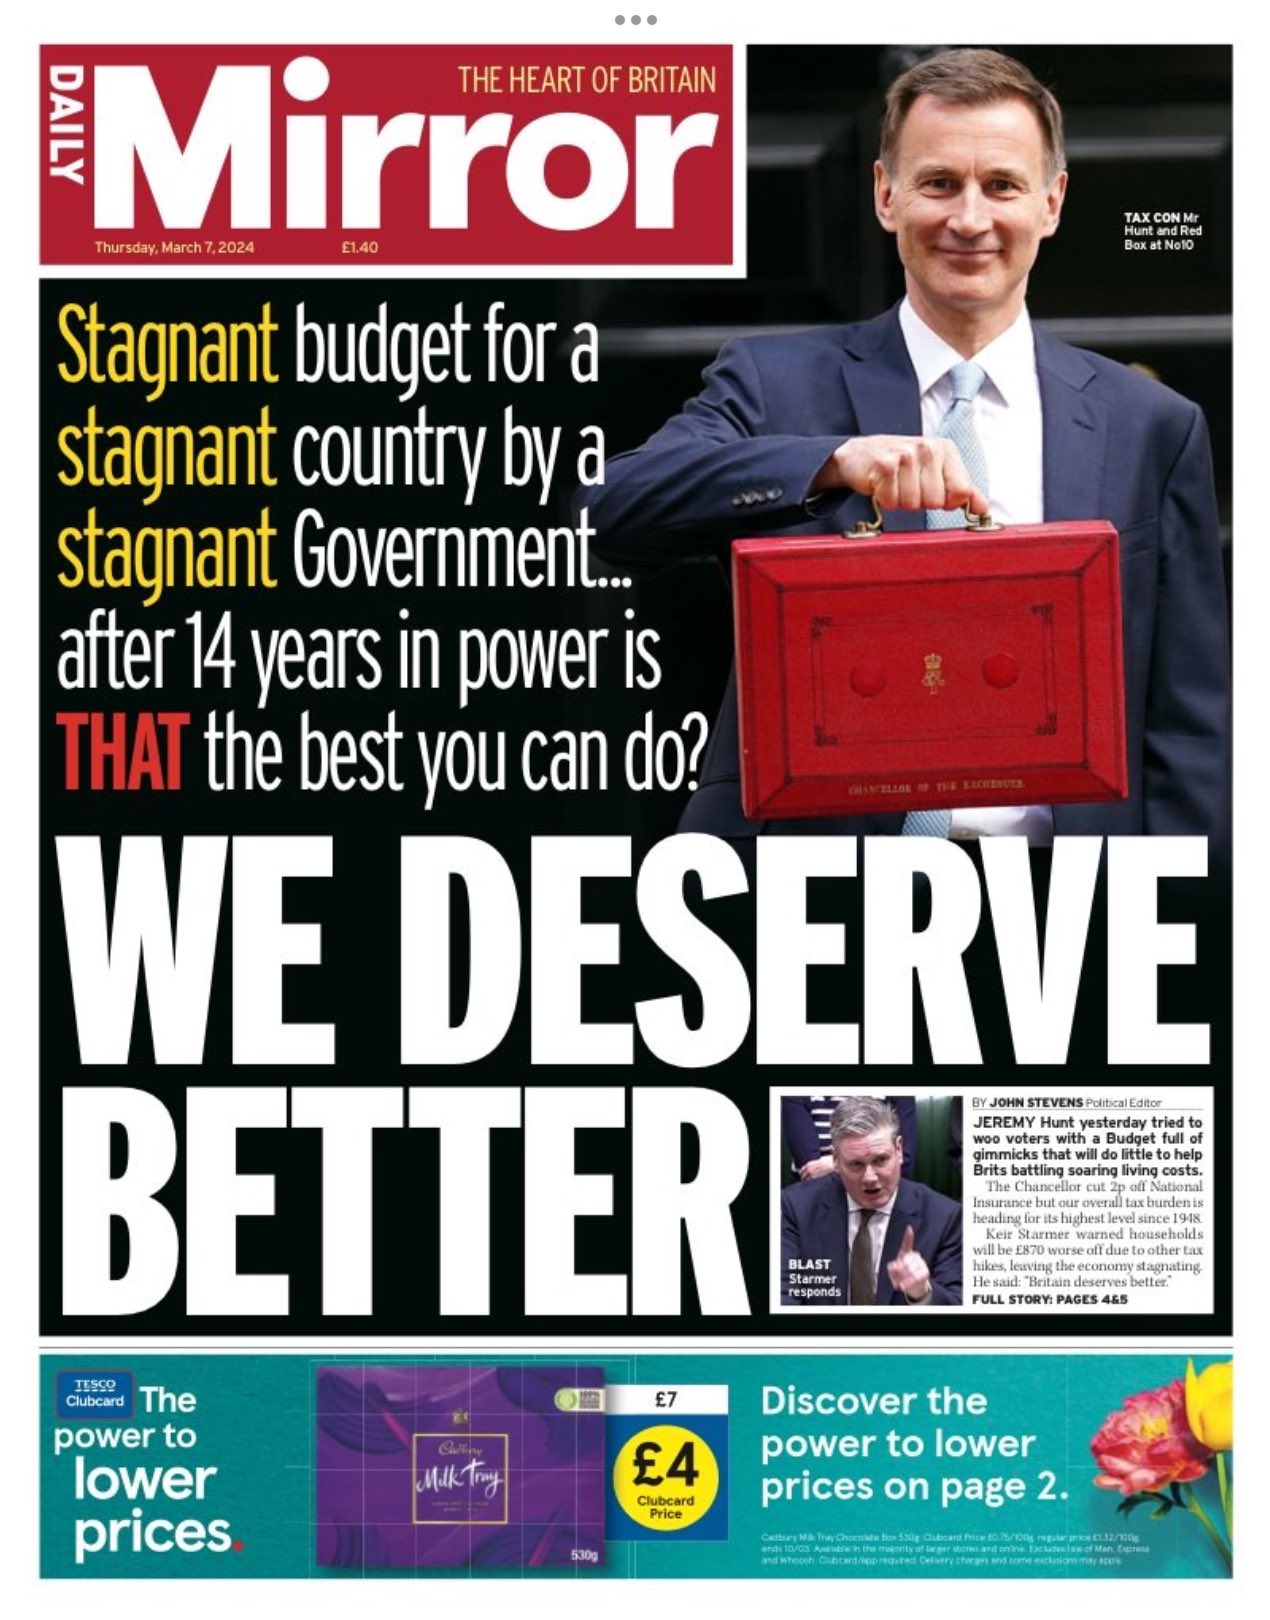 Daily Mirror 5 